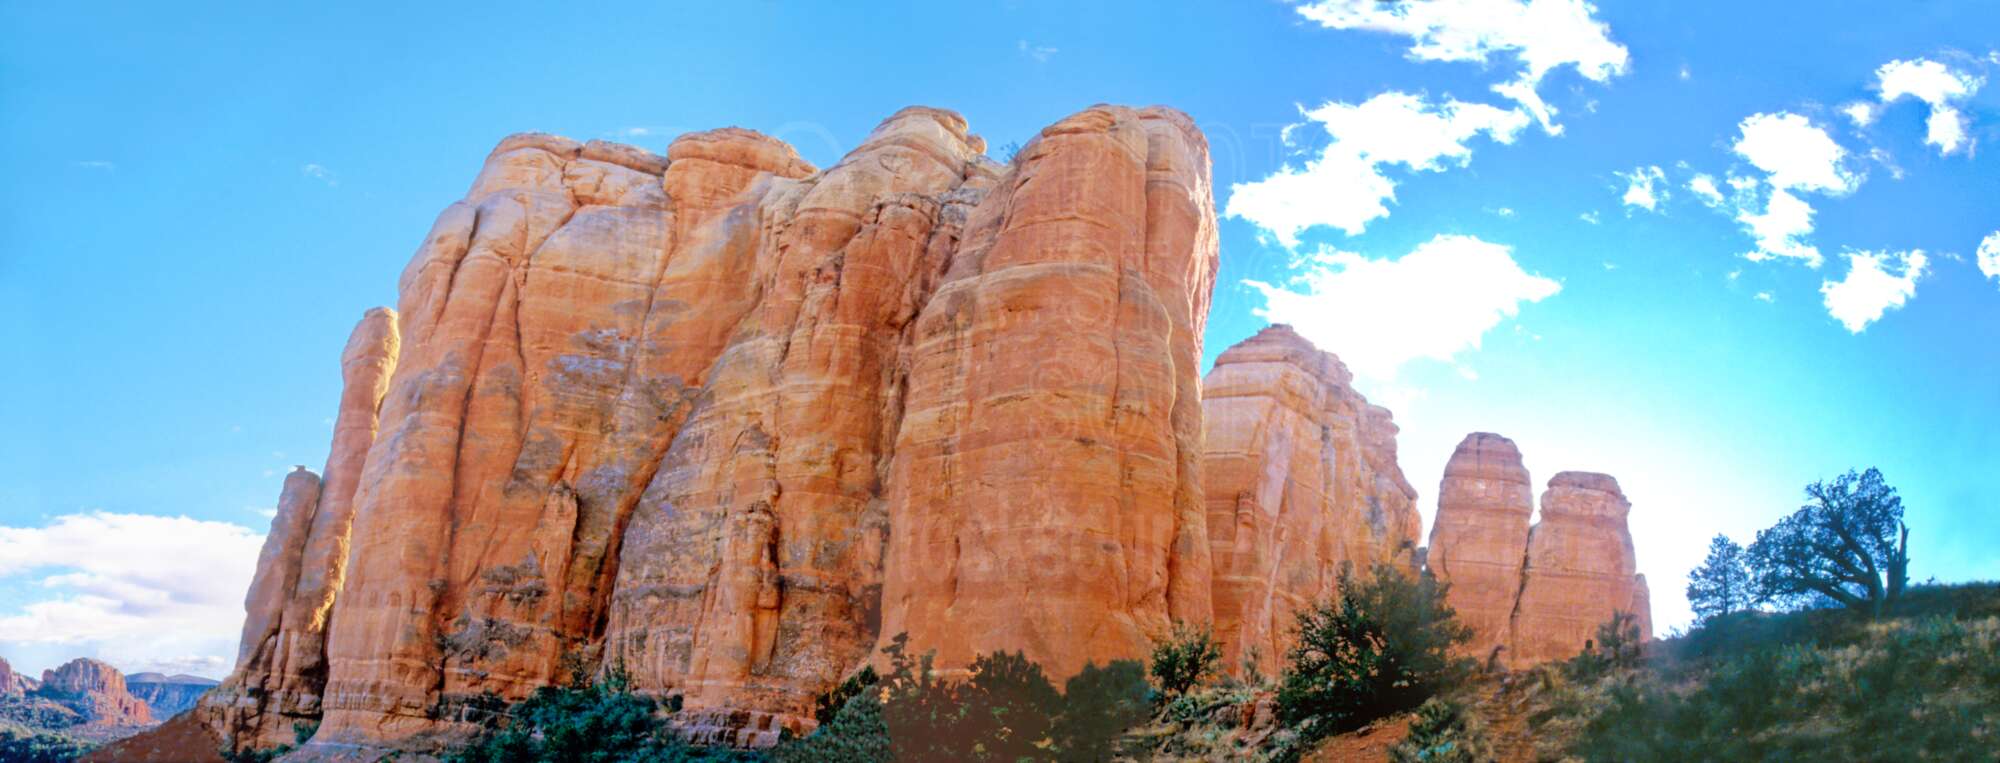 Cathedral Rock Monoliths